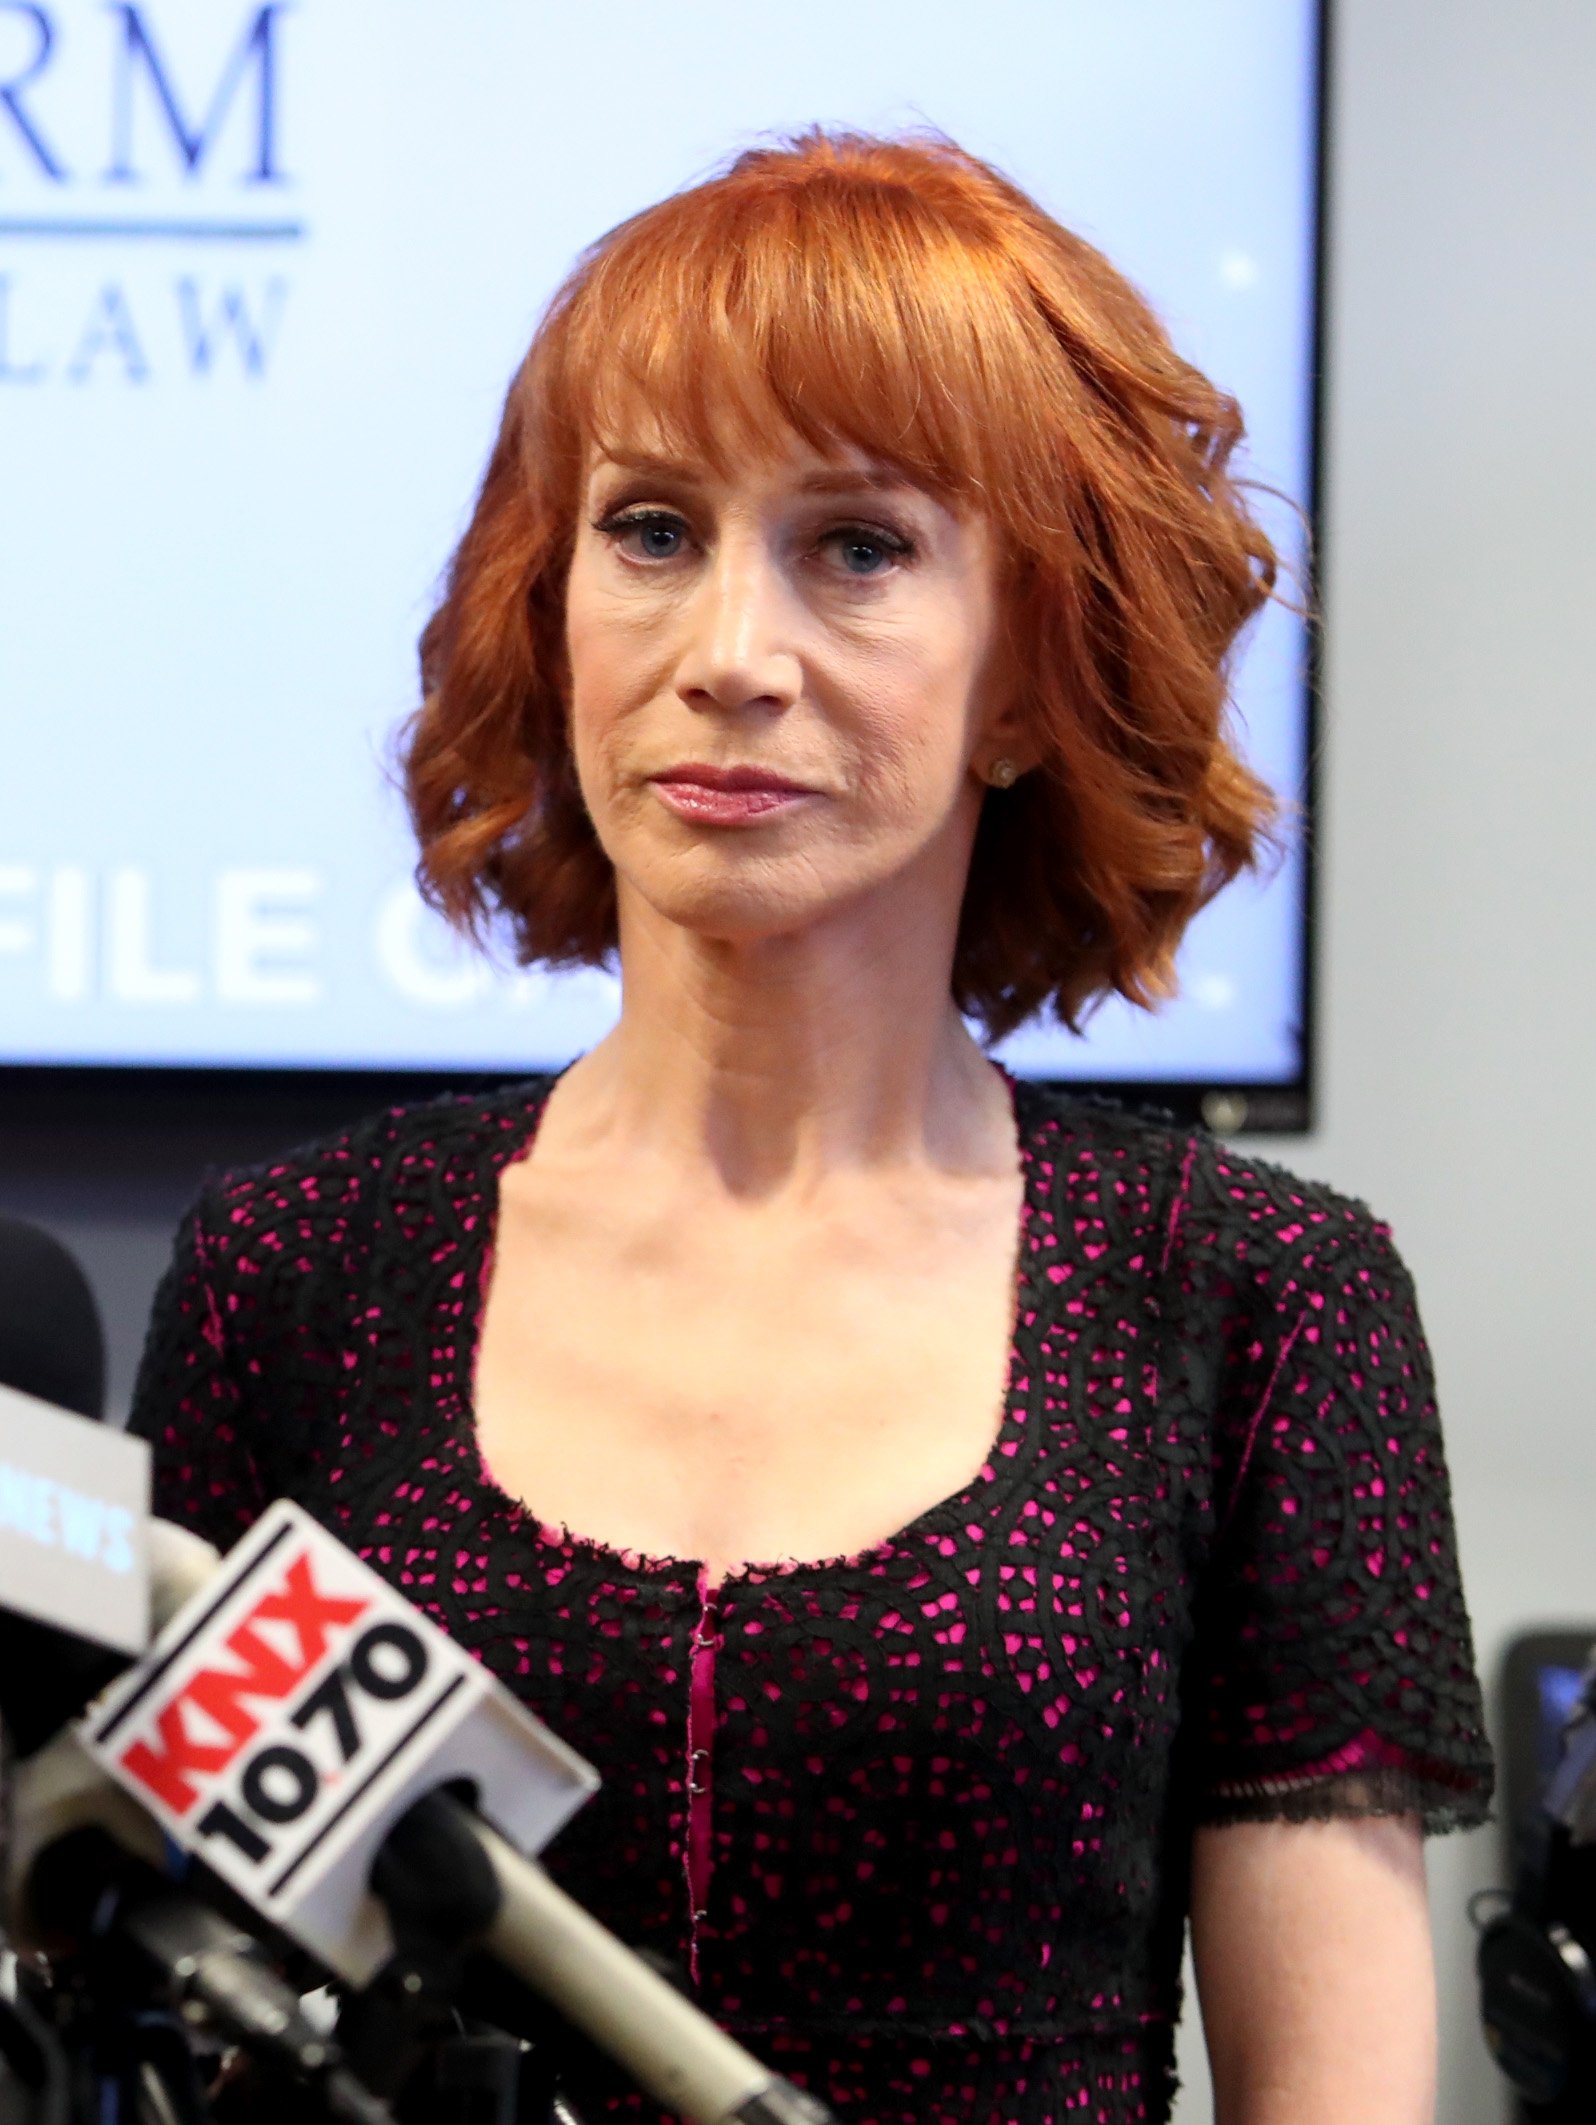 Kathy Griffin speas at a press conference at the Bloom Firm in Woodland Hills, California on June 2, 2017 | Photo: Getty Images